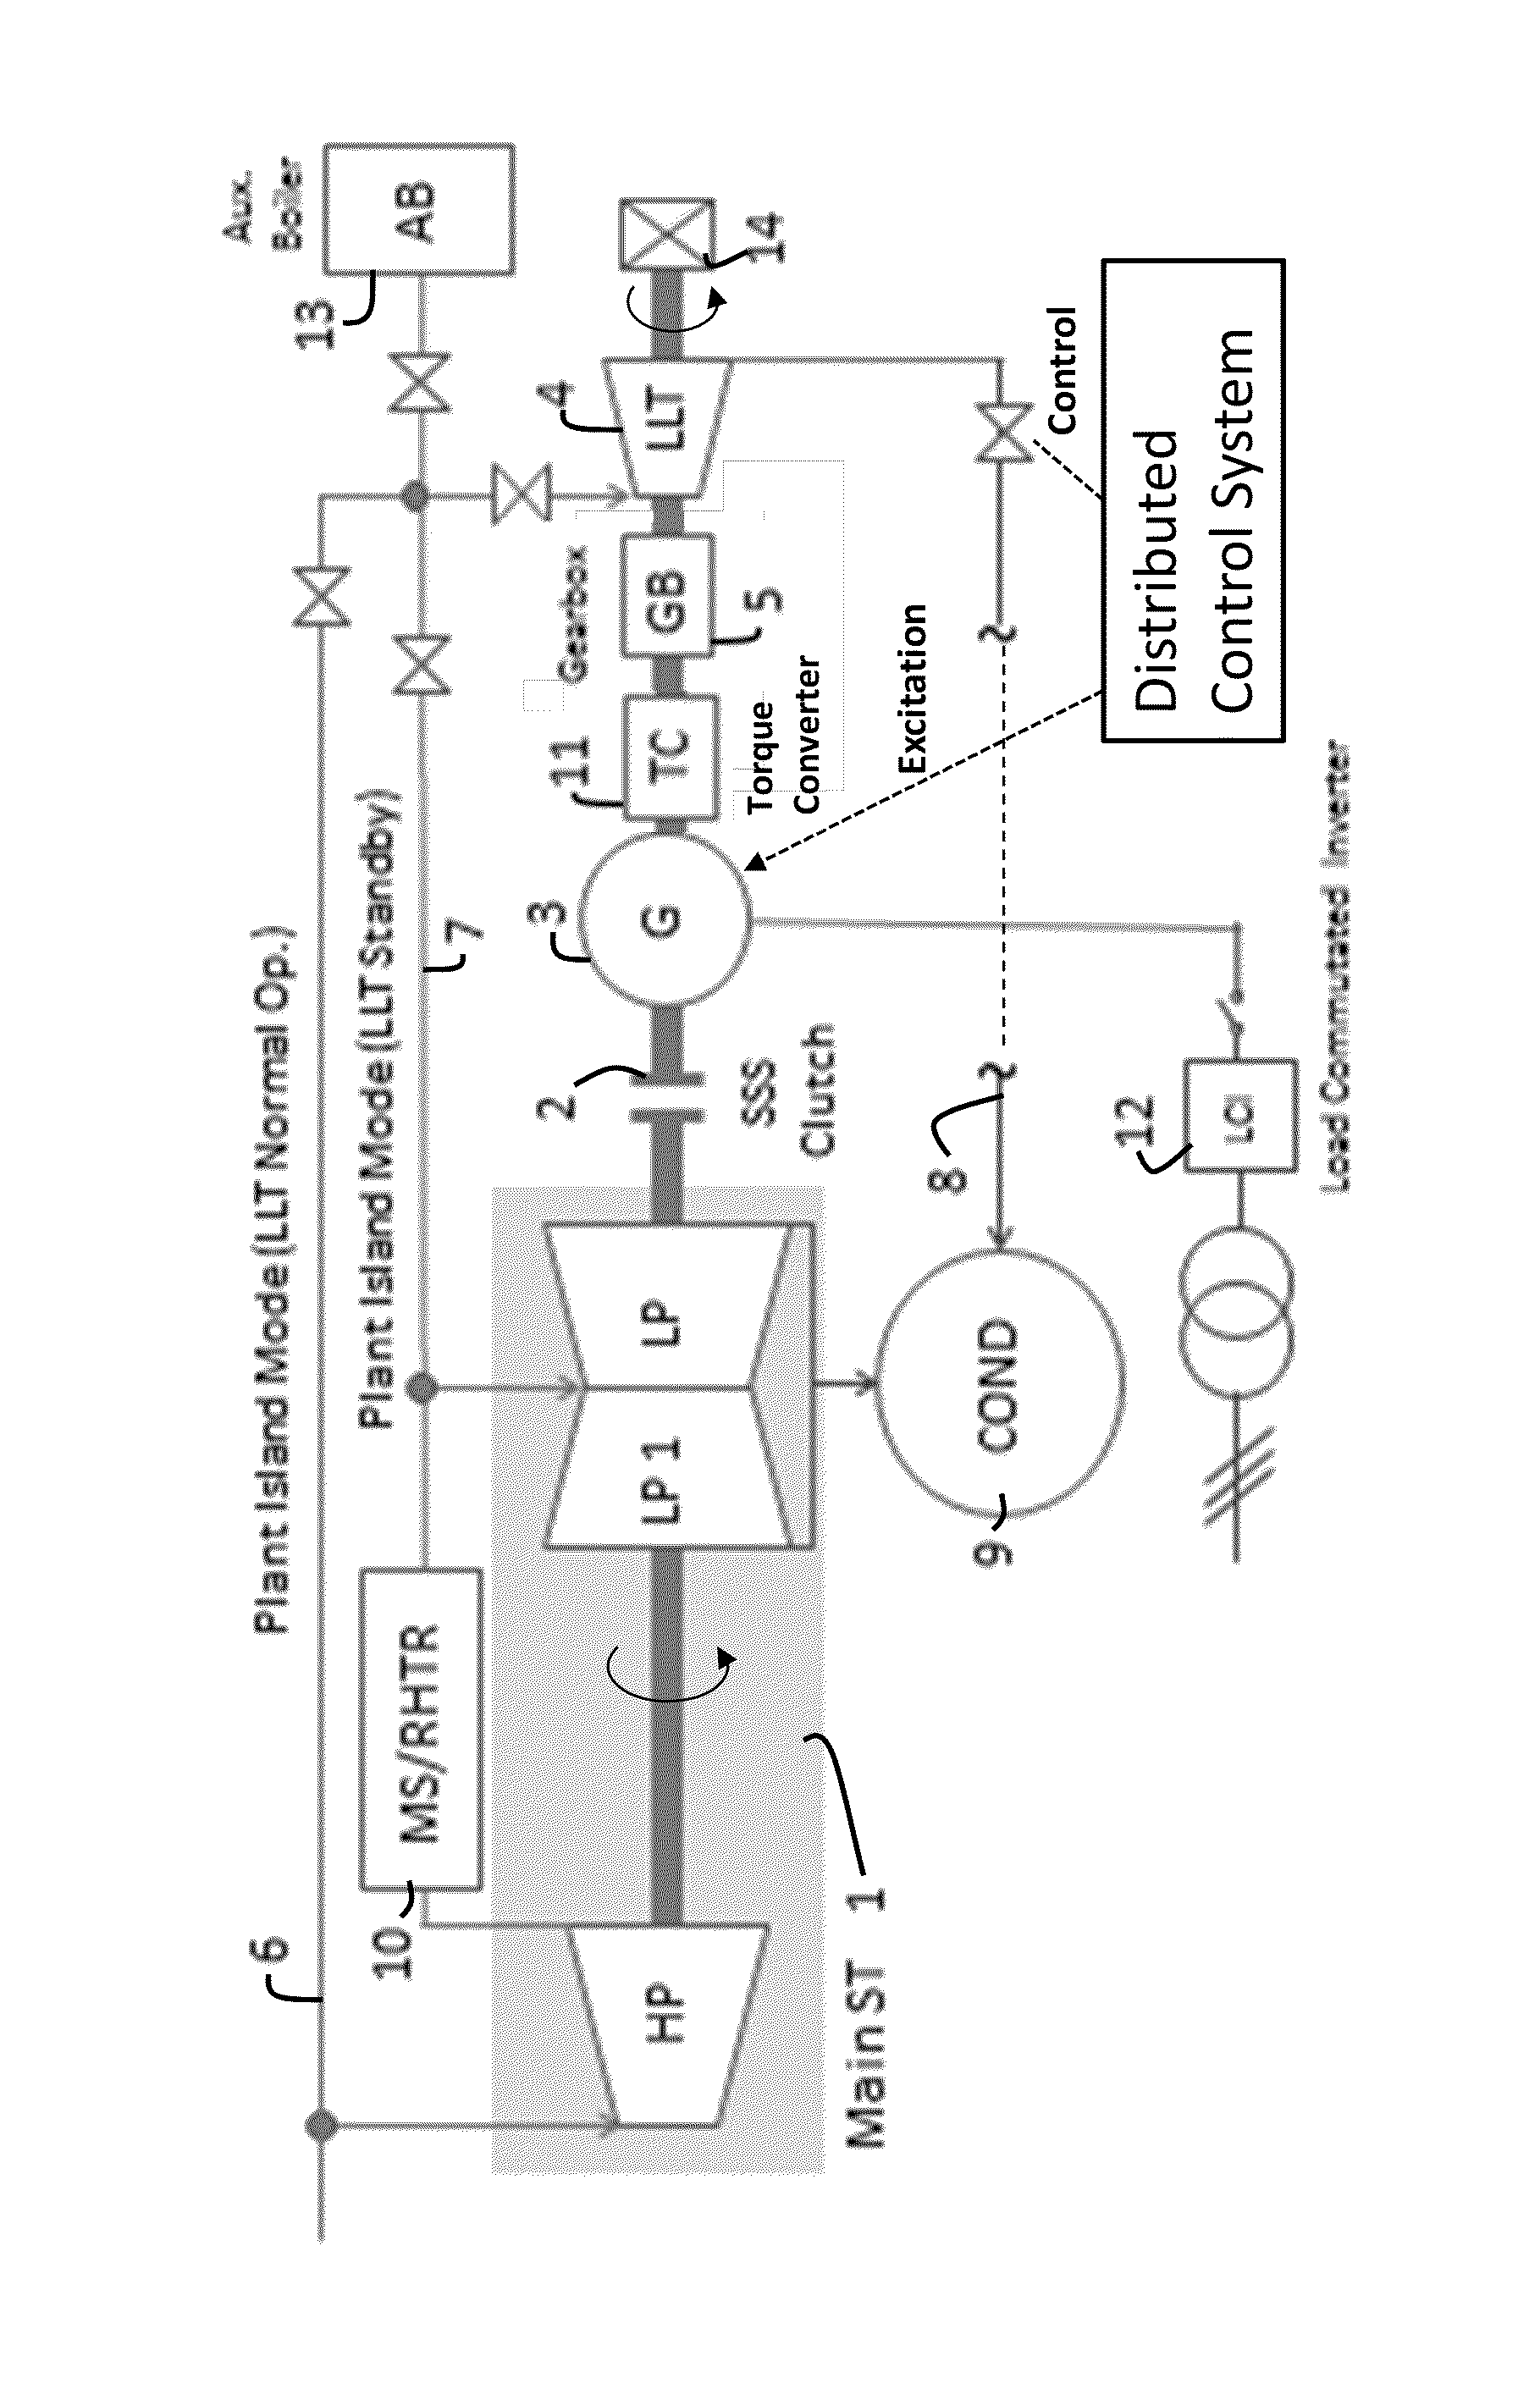 Method and apparatus for extended operation of steam turbines in islanding mode